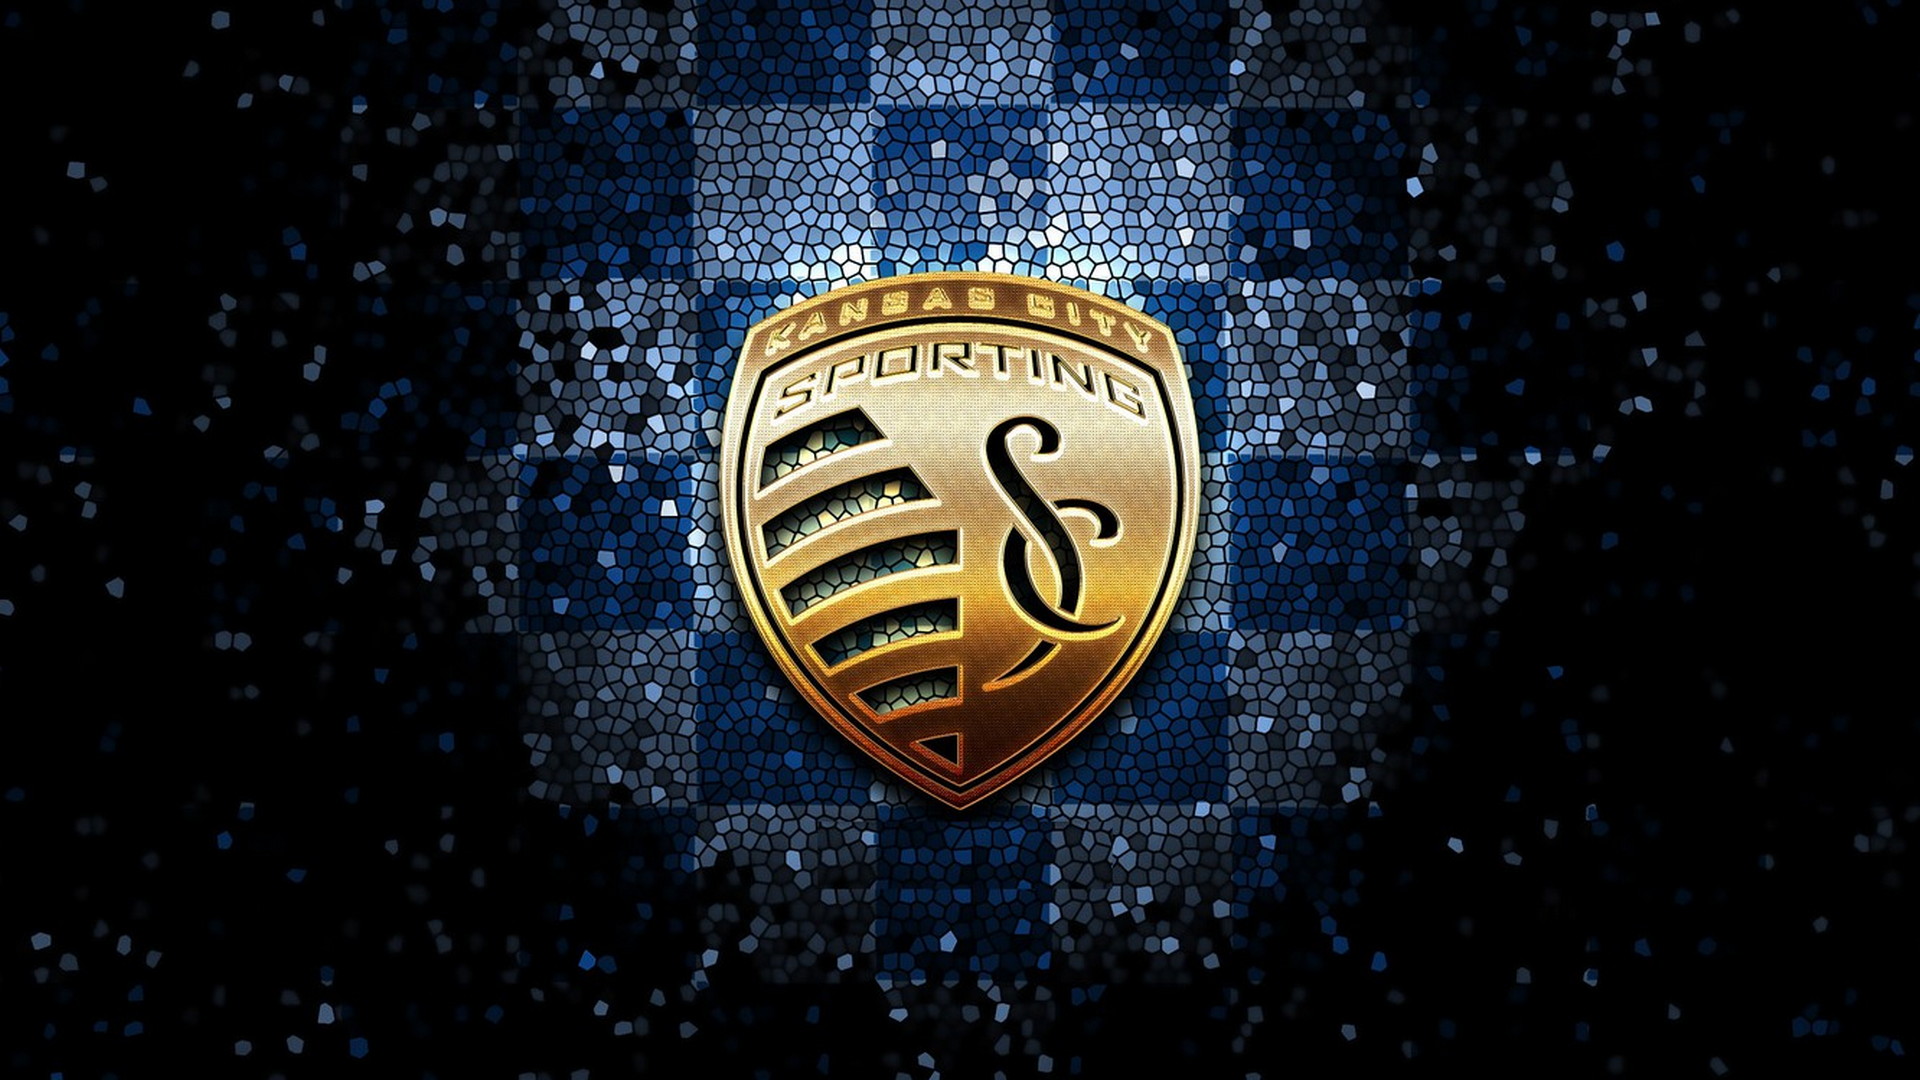 HD Desktop Wallpaper Sporting KC With high-resolution 1920X1080 pixel. You can use this wallpaper for your Desktop Computers, Mac Screensavers, Windows Backgrounds, iPhone Wallpapers, Tablet or Android Lock screen and another Mobile device